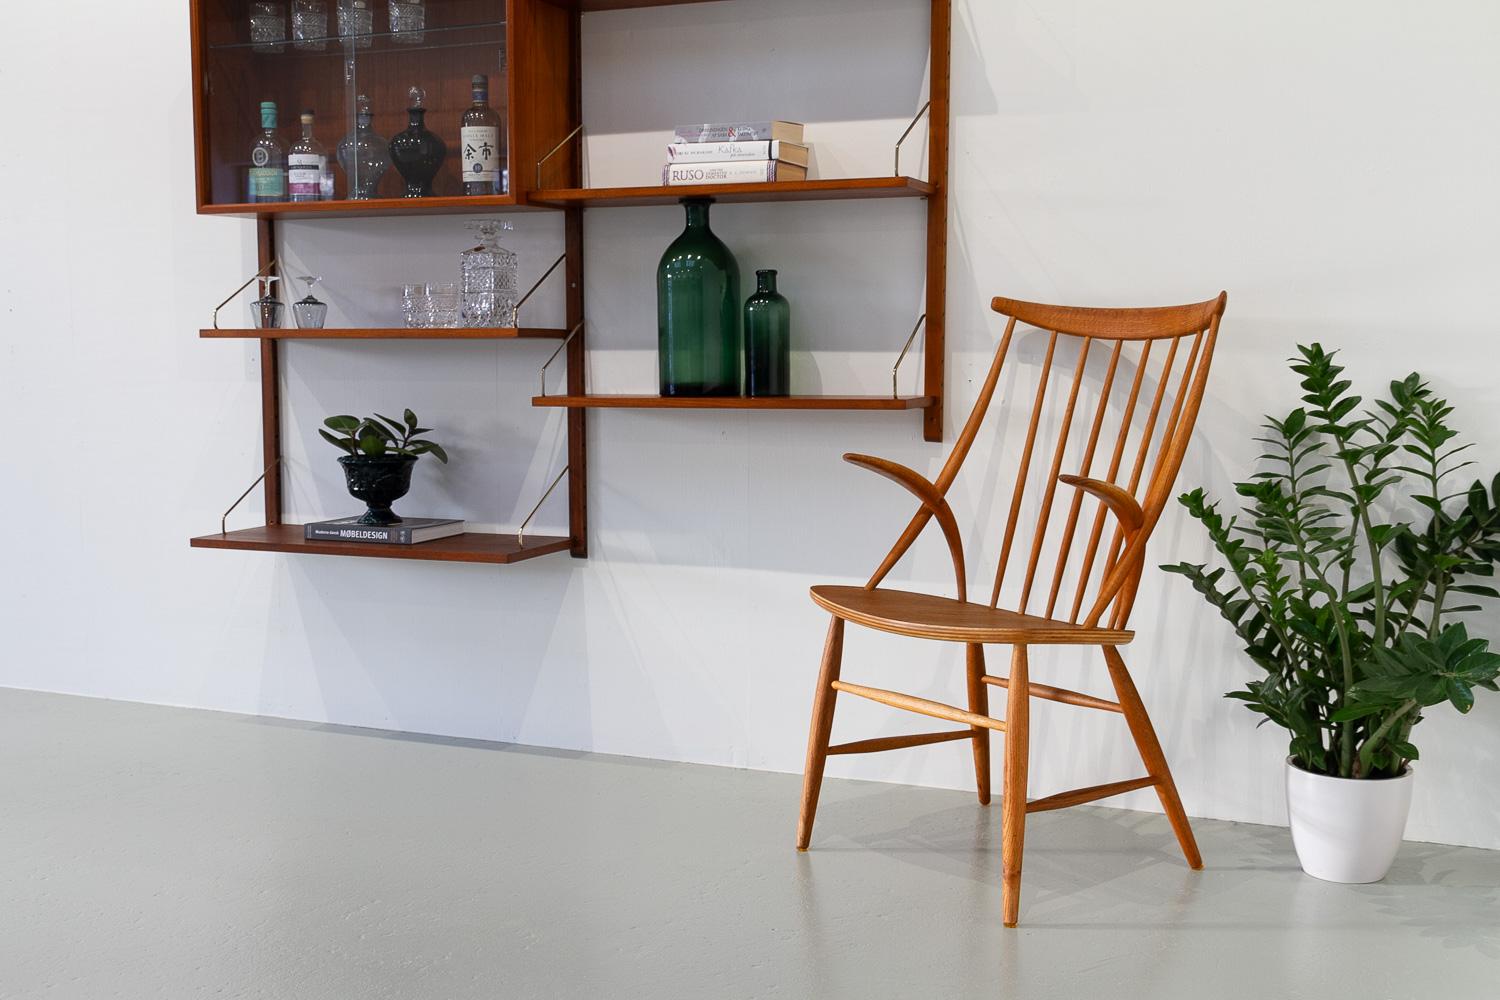 Danish Modern Armchair IW2 in Oak by Illum Wikkelsø, 1960s.
Danish Mid-Century modern oak chair designed by Danish architect Kristian Illum Wikkelsø and manufactured by master carpenter Niels Eilersen, Denmark.

Beautiful design with the iconic